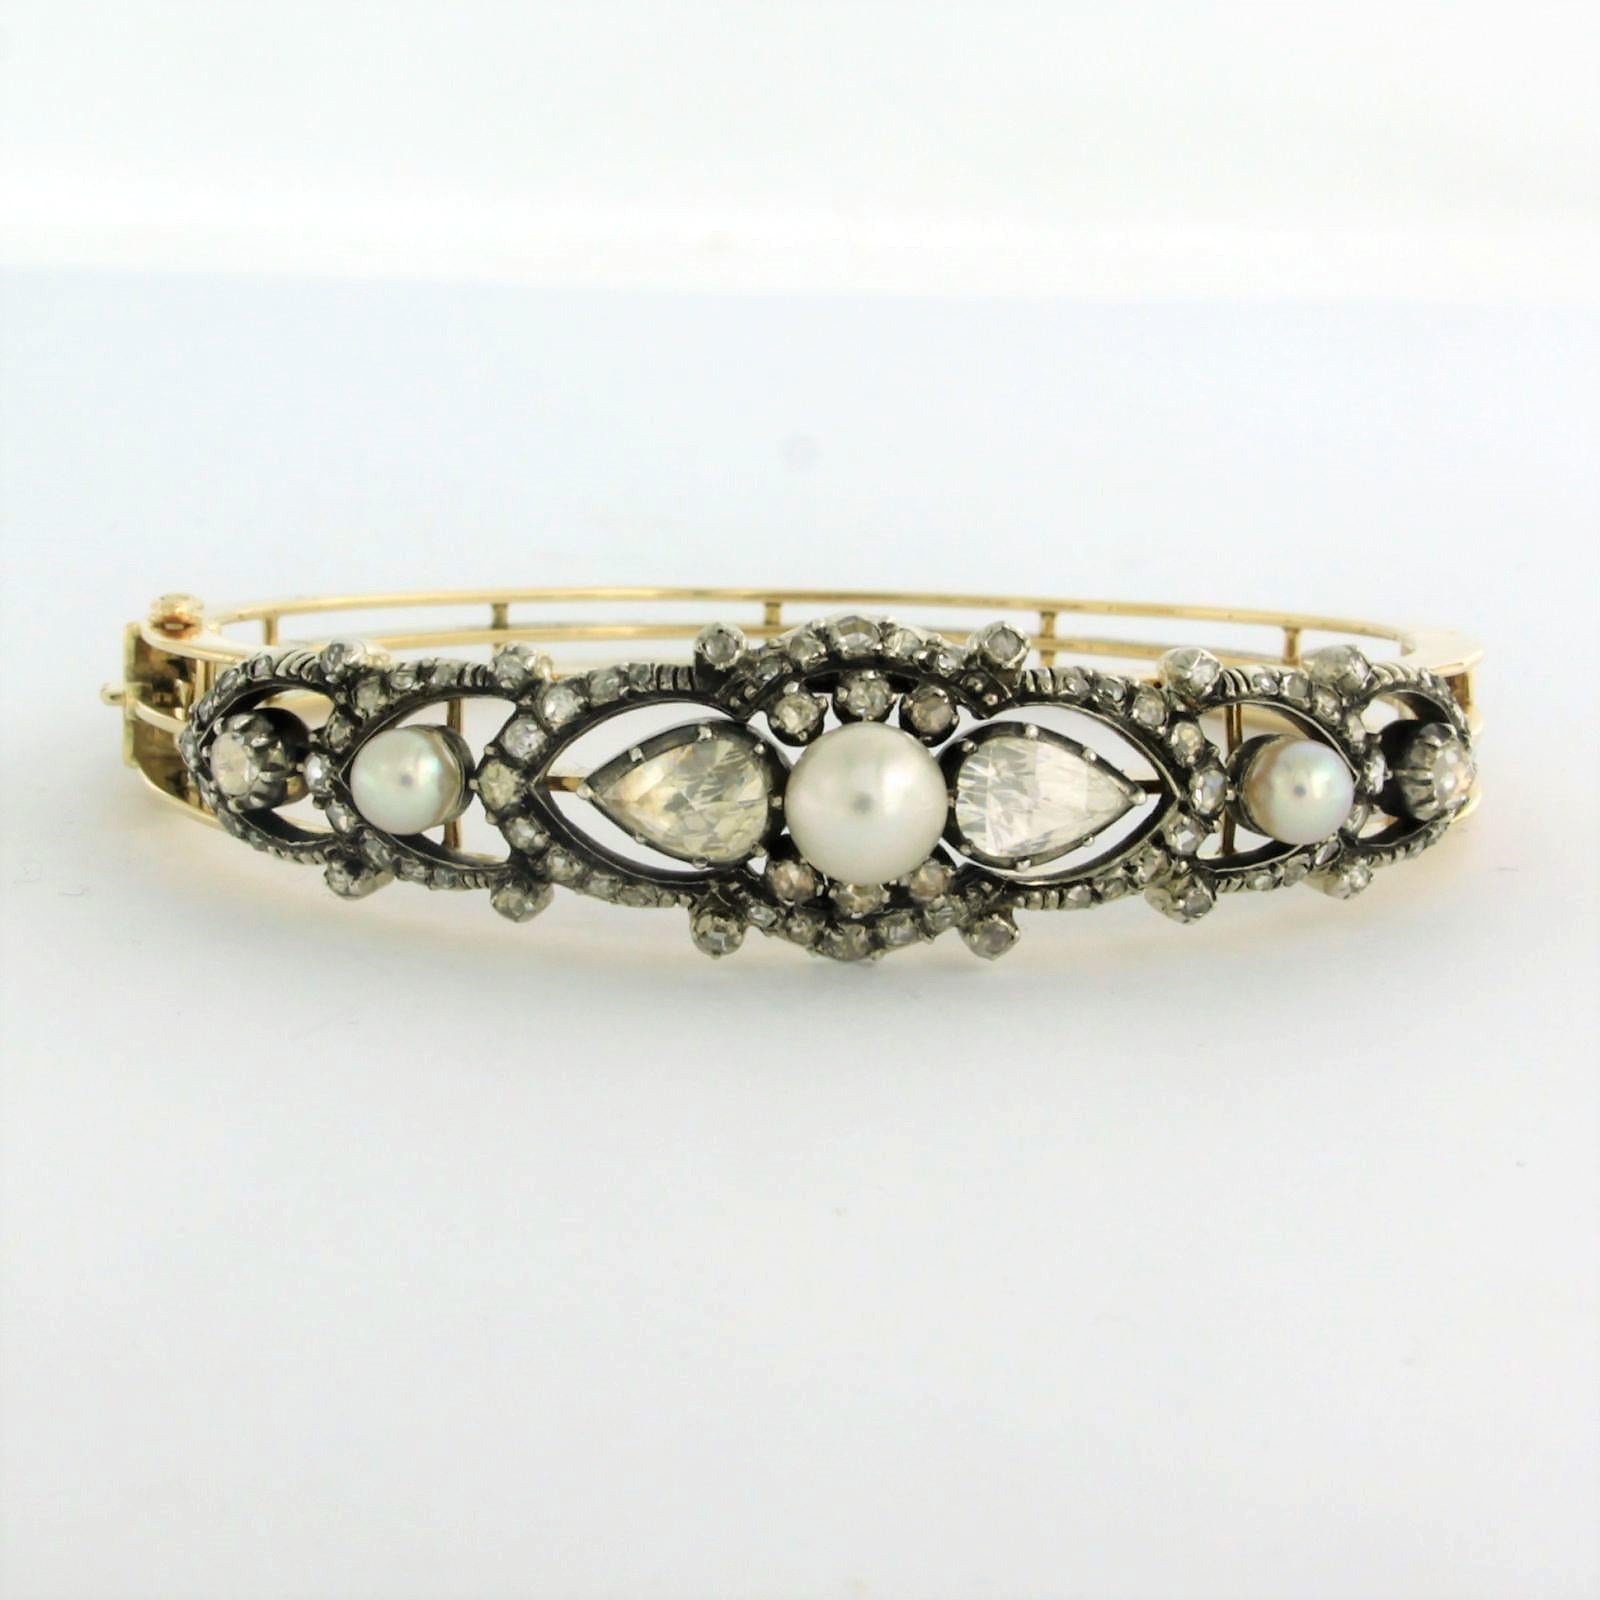 14k yellow gold hinge bracelet with a silver top set with various rose diamonds. 1.00ct – G/H – SI – inner size 5.7 cm x 5.1 cm wide

detailed description

the top of the bracelet is 1.5 cm wide by 1.1 cm high

the inside of the bracelet is 5.7 cm